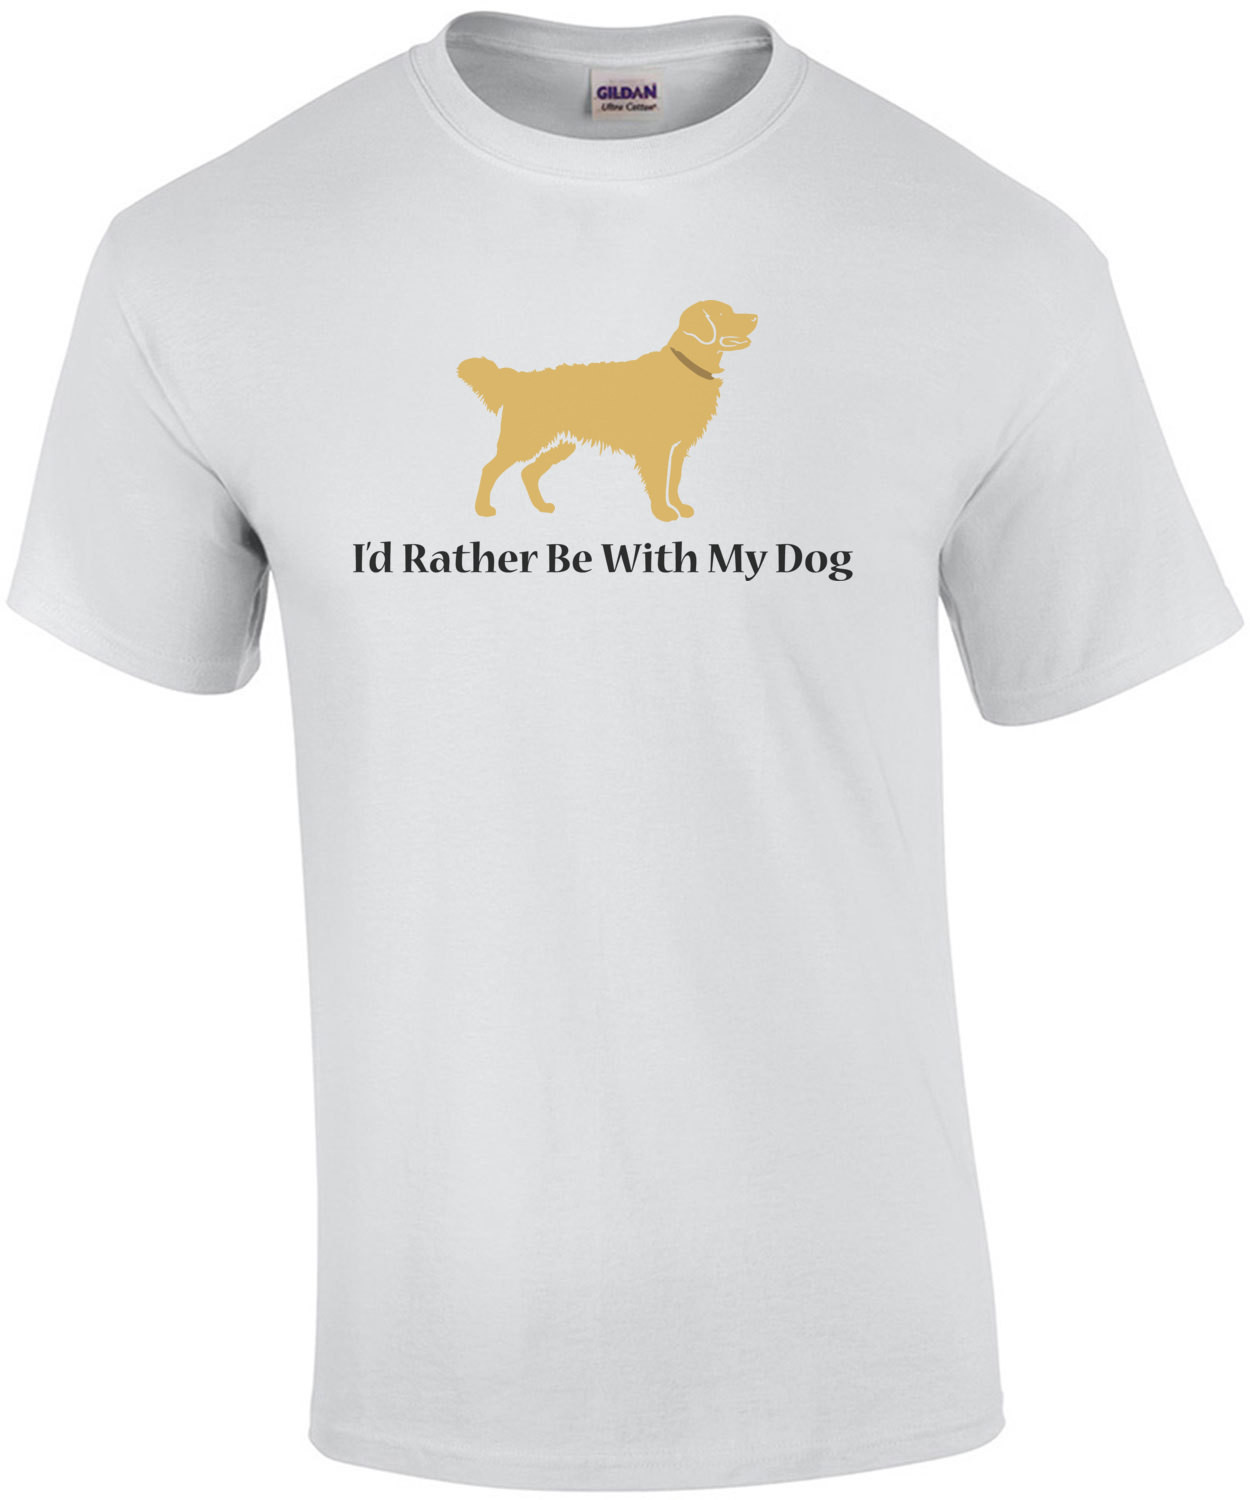 I'd rather be with my dog - Golden Retriever T-Shirt